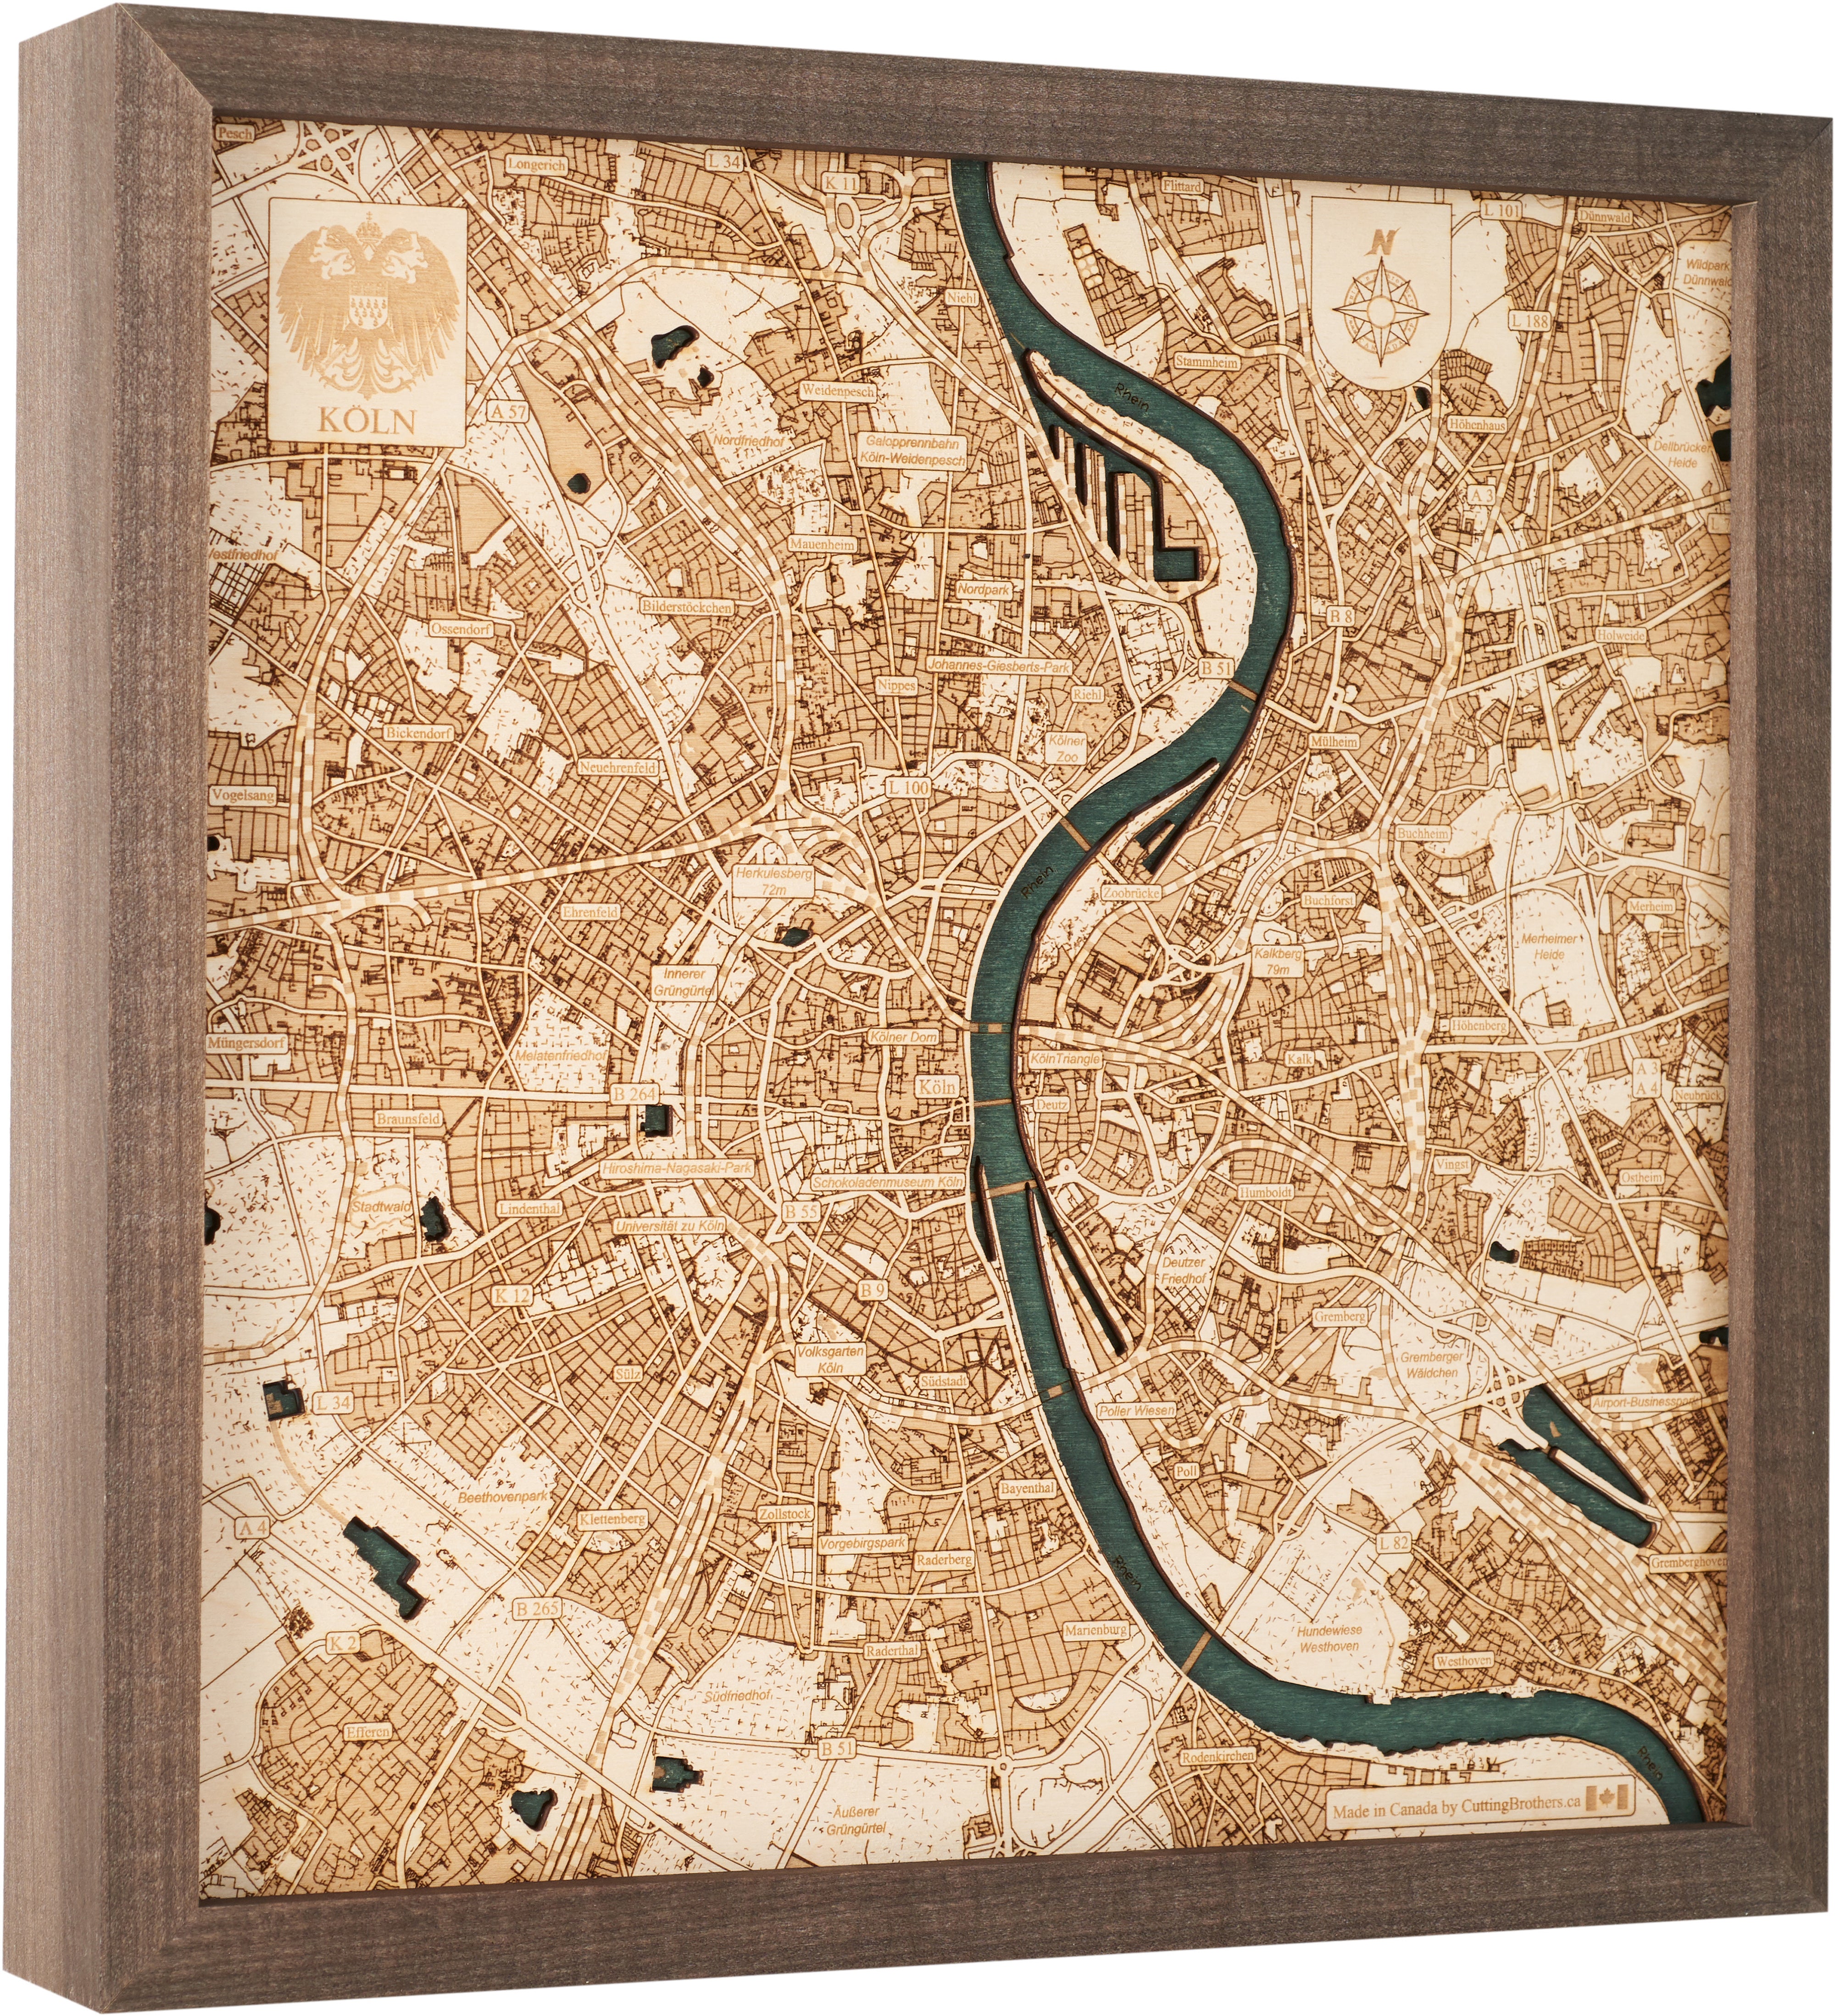 COLOGNE 3D wooden wall map - version S 